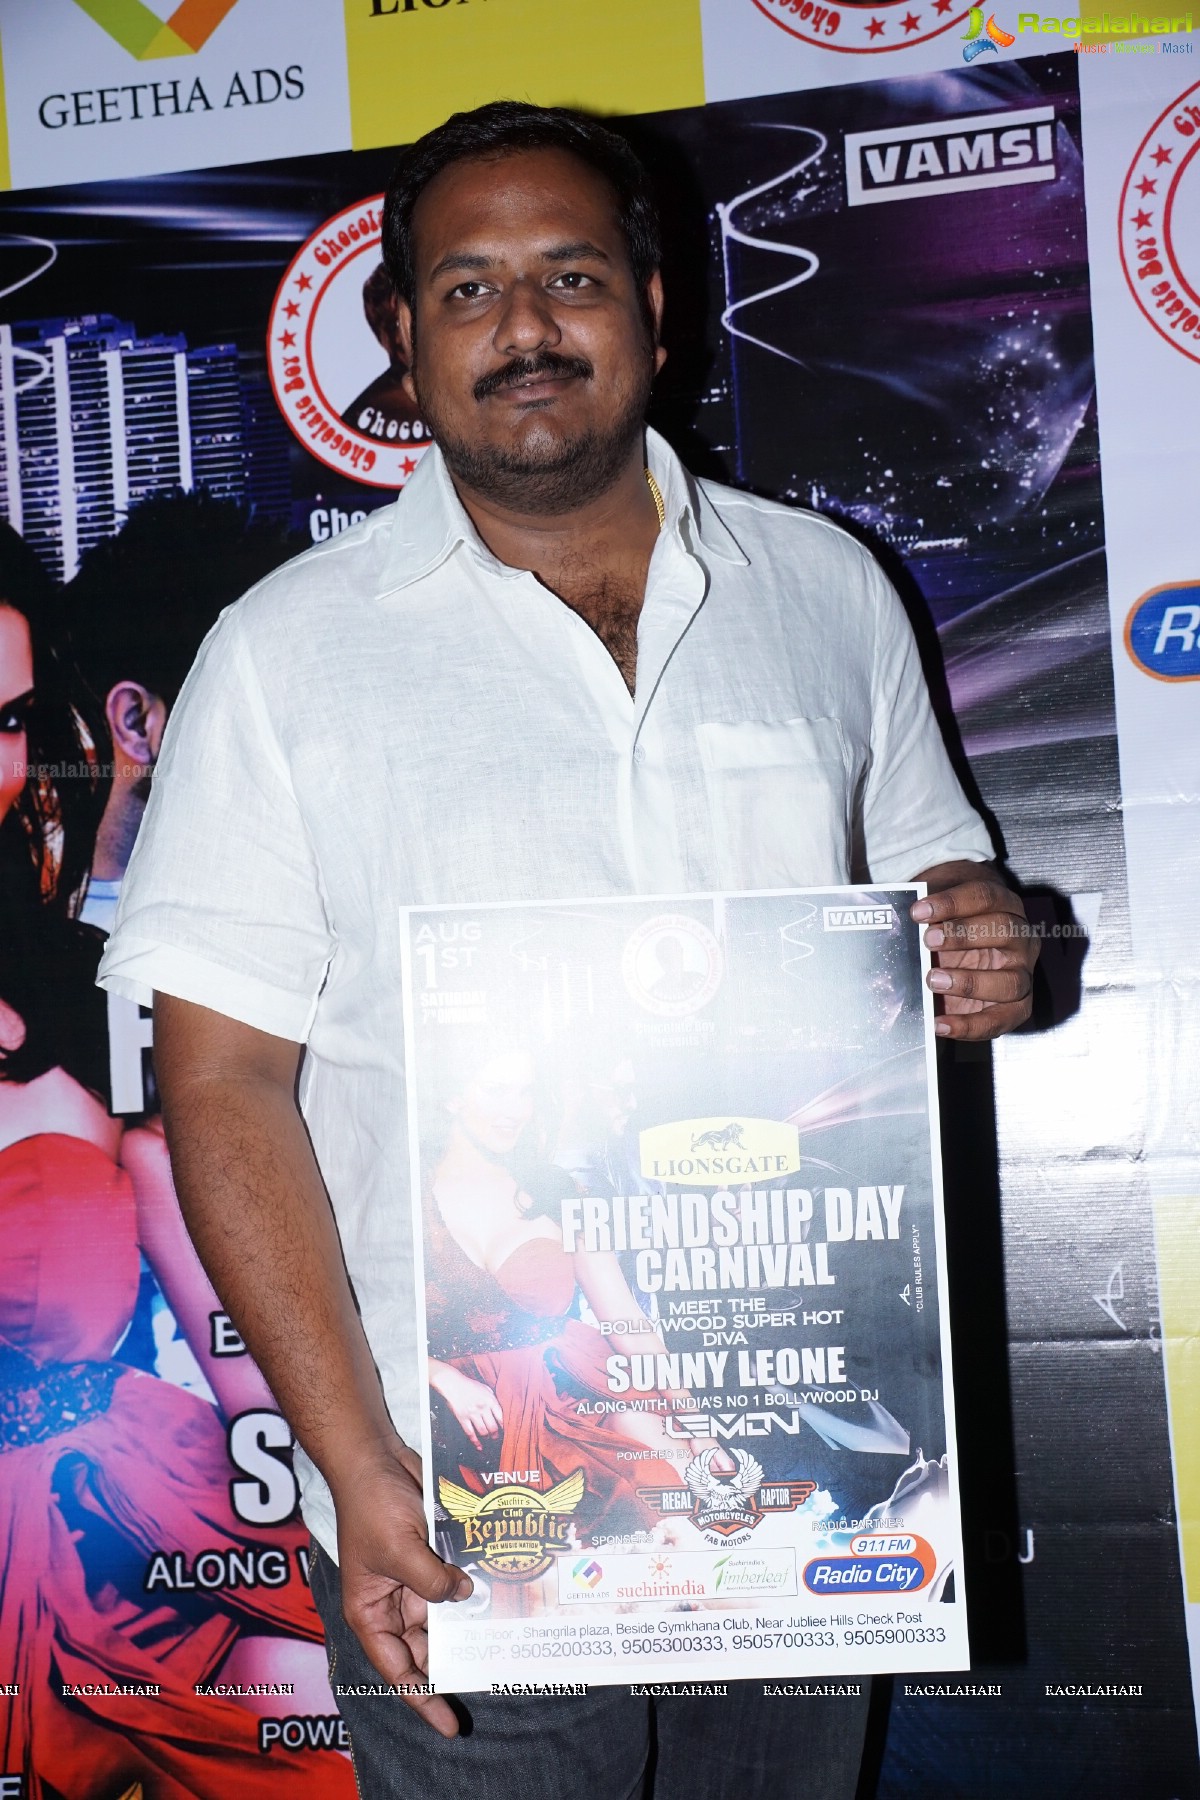 Chocolate Boy Presents Bollywood Super Hot Sunny Leone Friendship Day Event Poster Launch at Club Republic